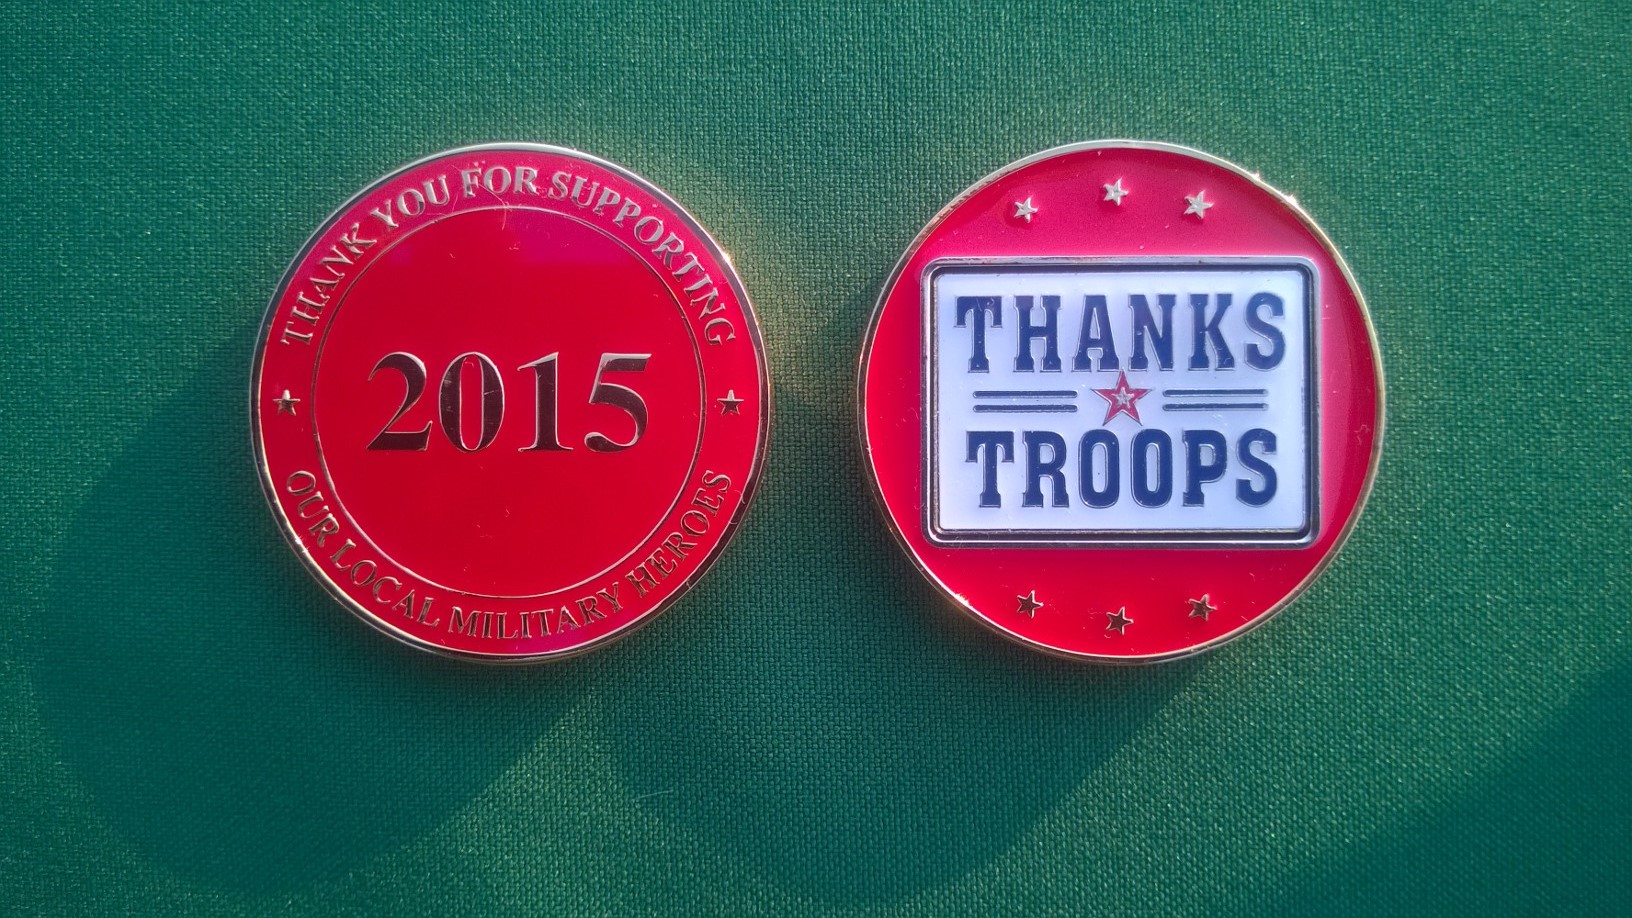 Thanks Troops Golf Tournament